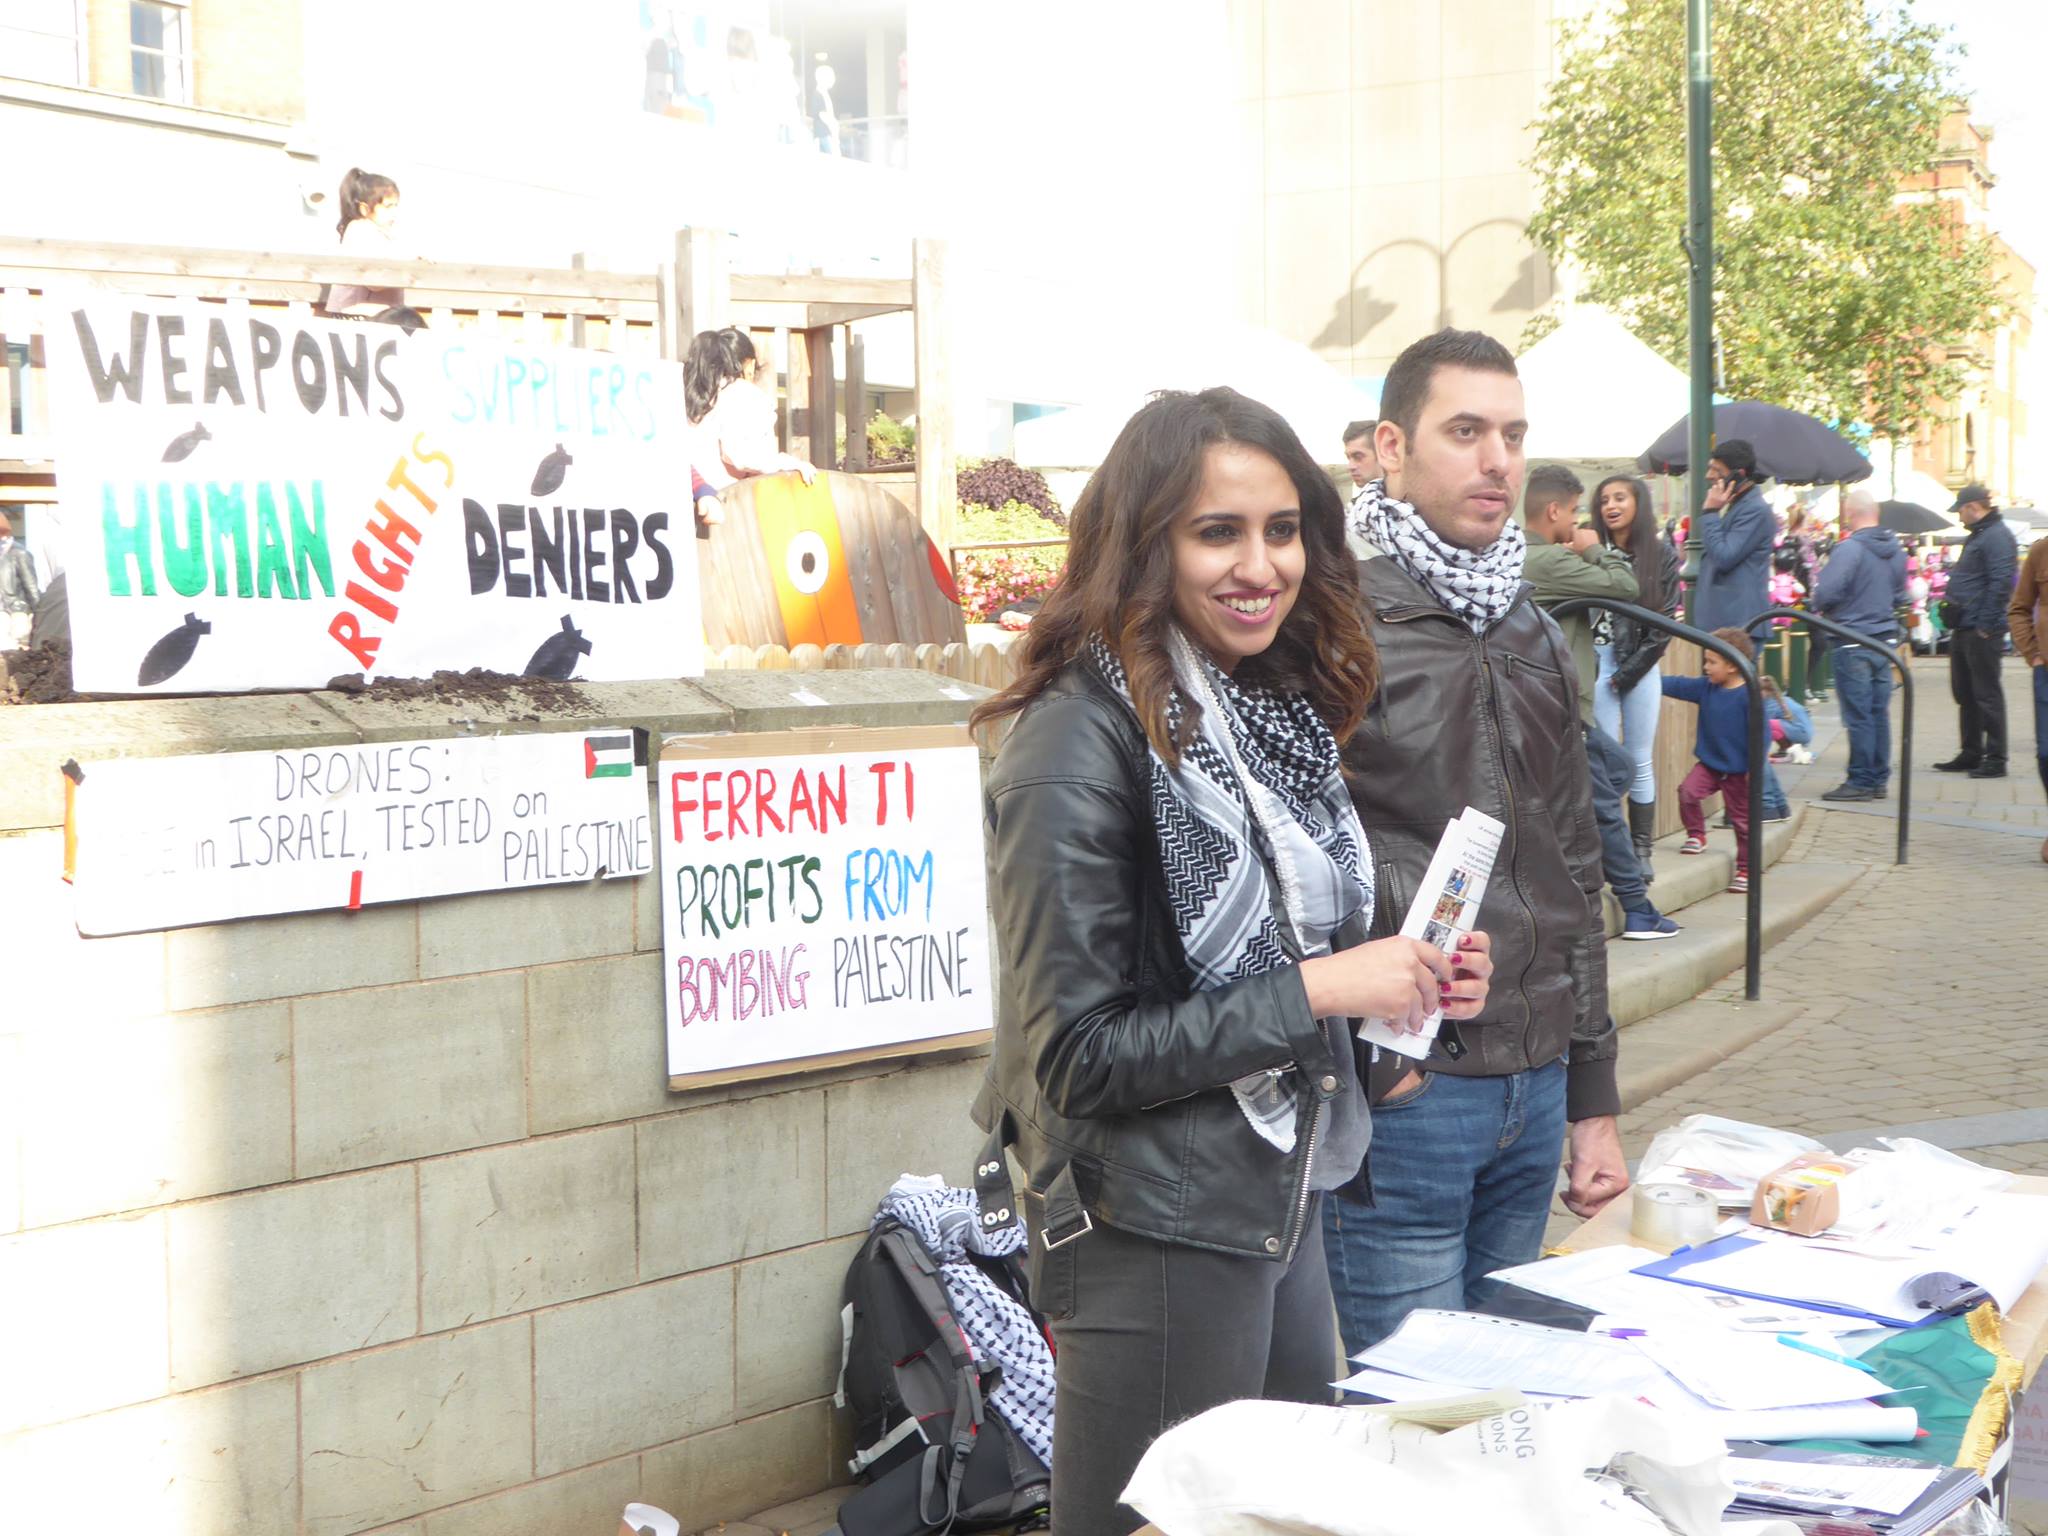 campaigners leaflet the public and hold a stall in Oldham town centre